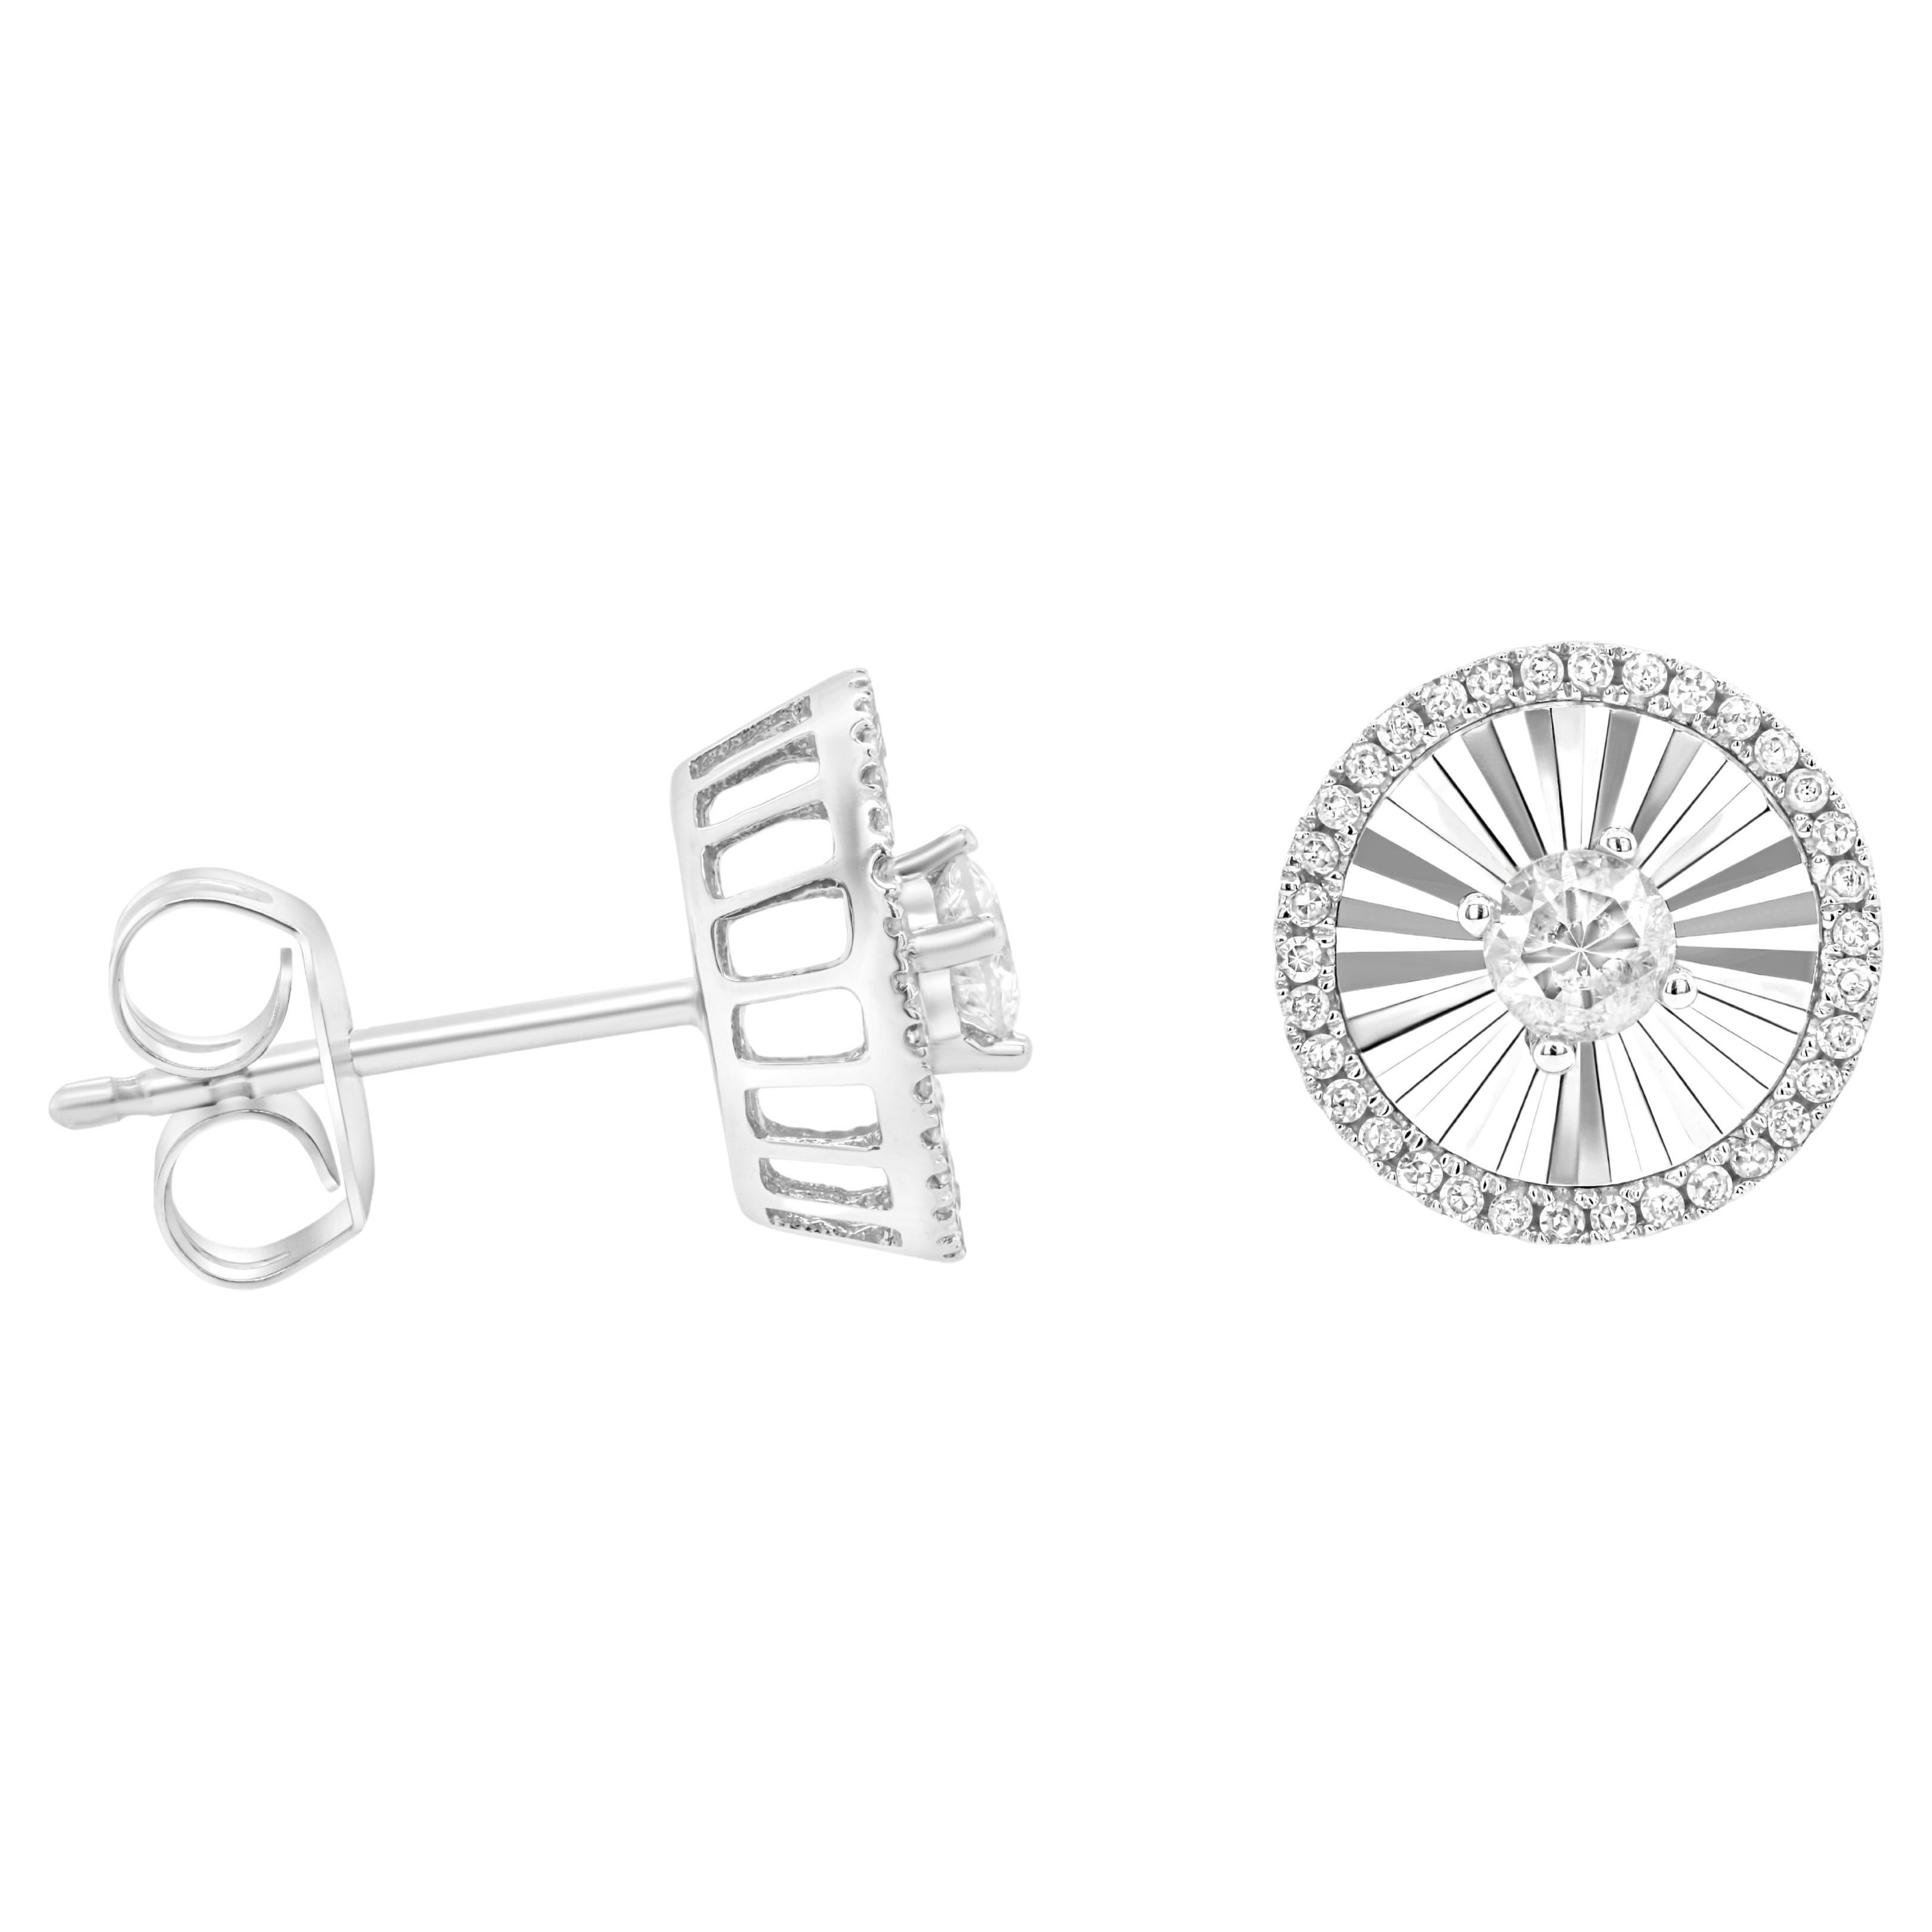 Diana M. 14kt white gold diamond sunburst round stud earrings containing 0.40cts For Sale